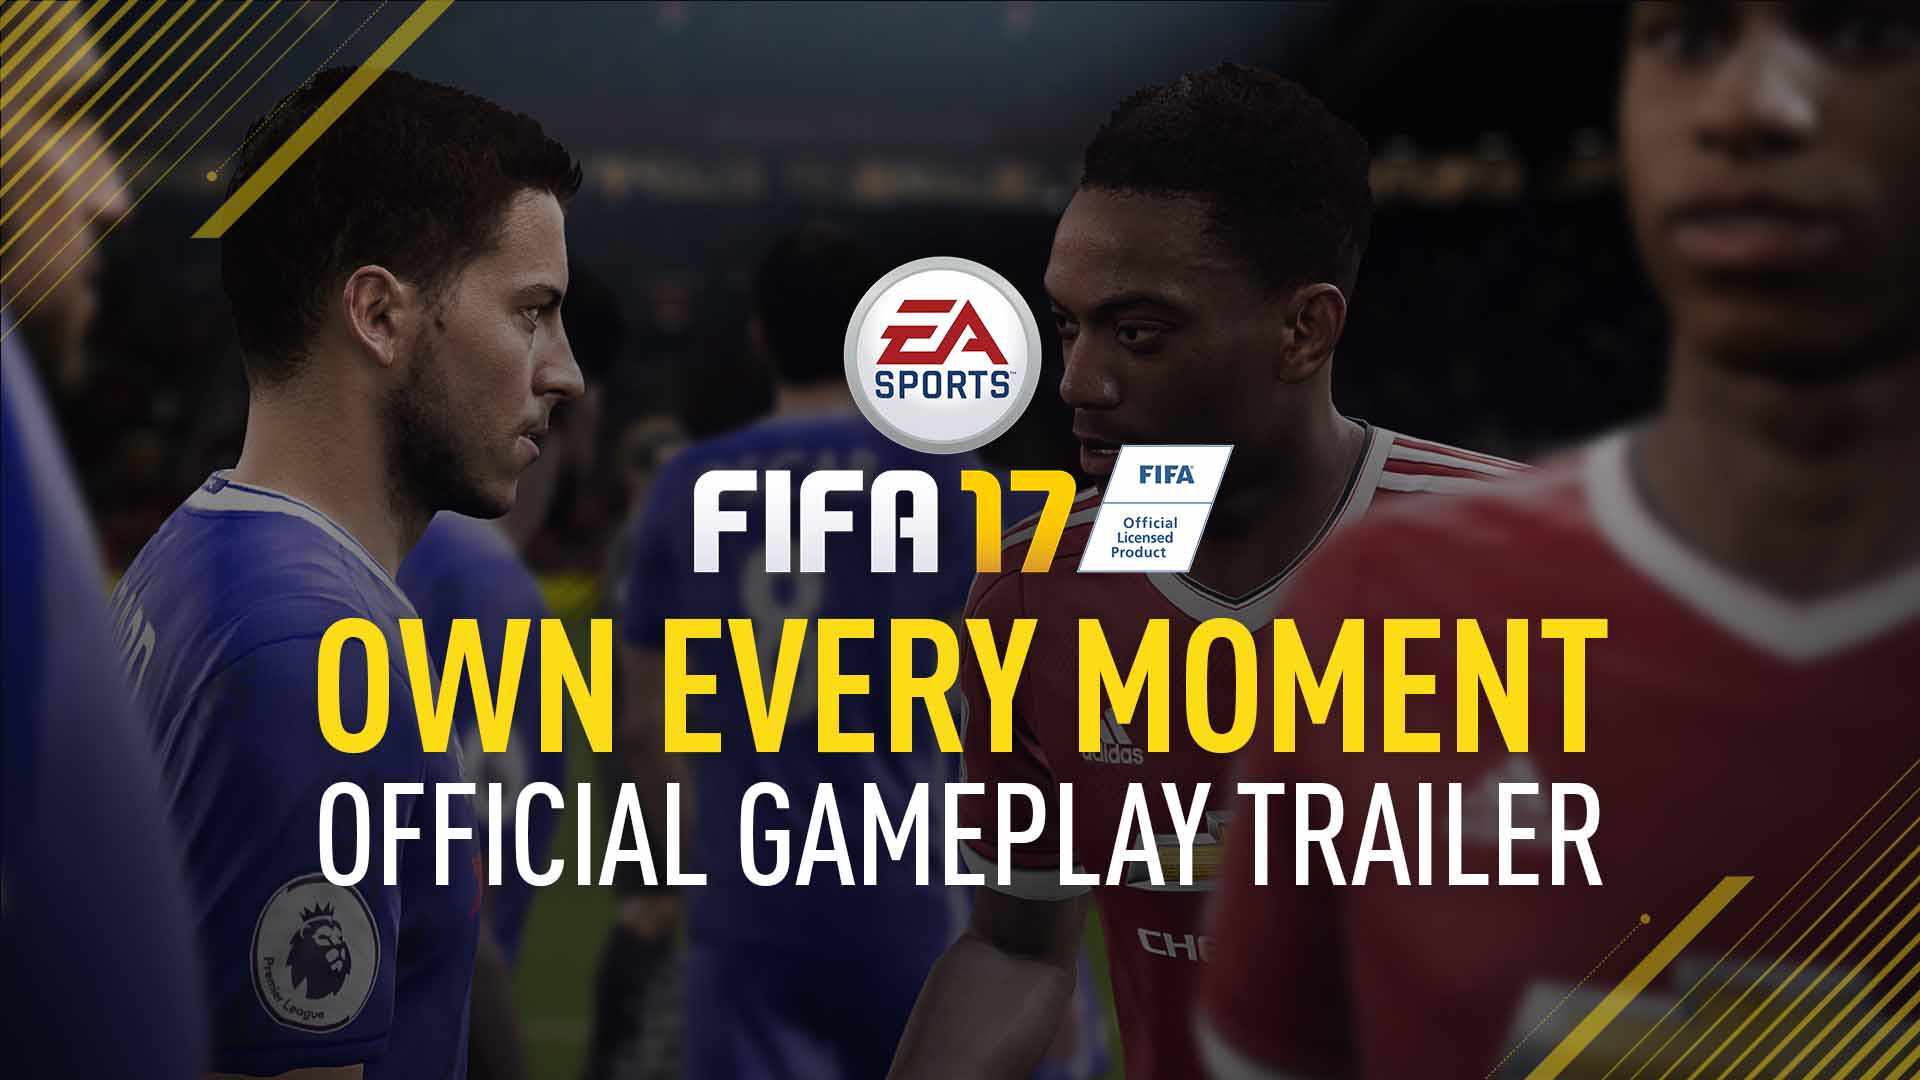 FIFA 17 Trailer – Own Every Moment